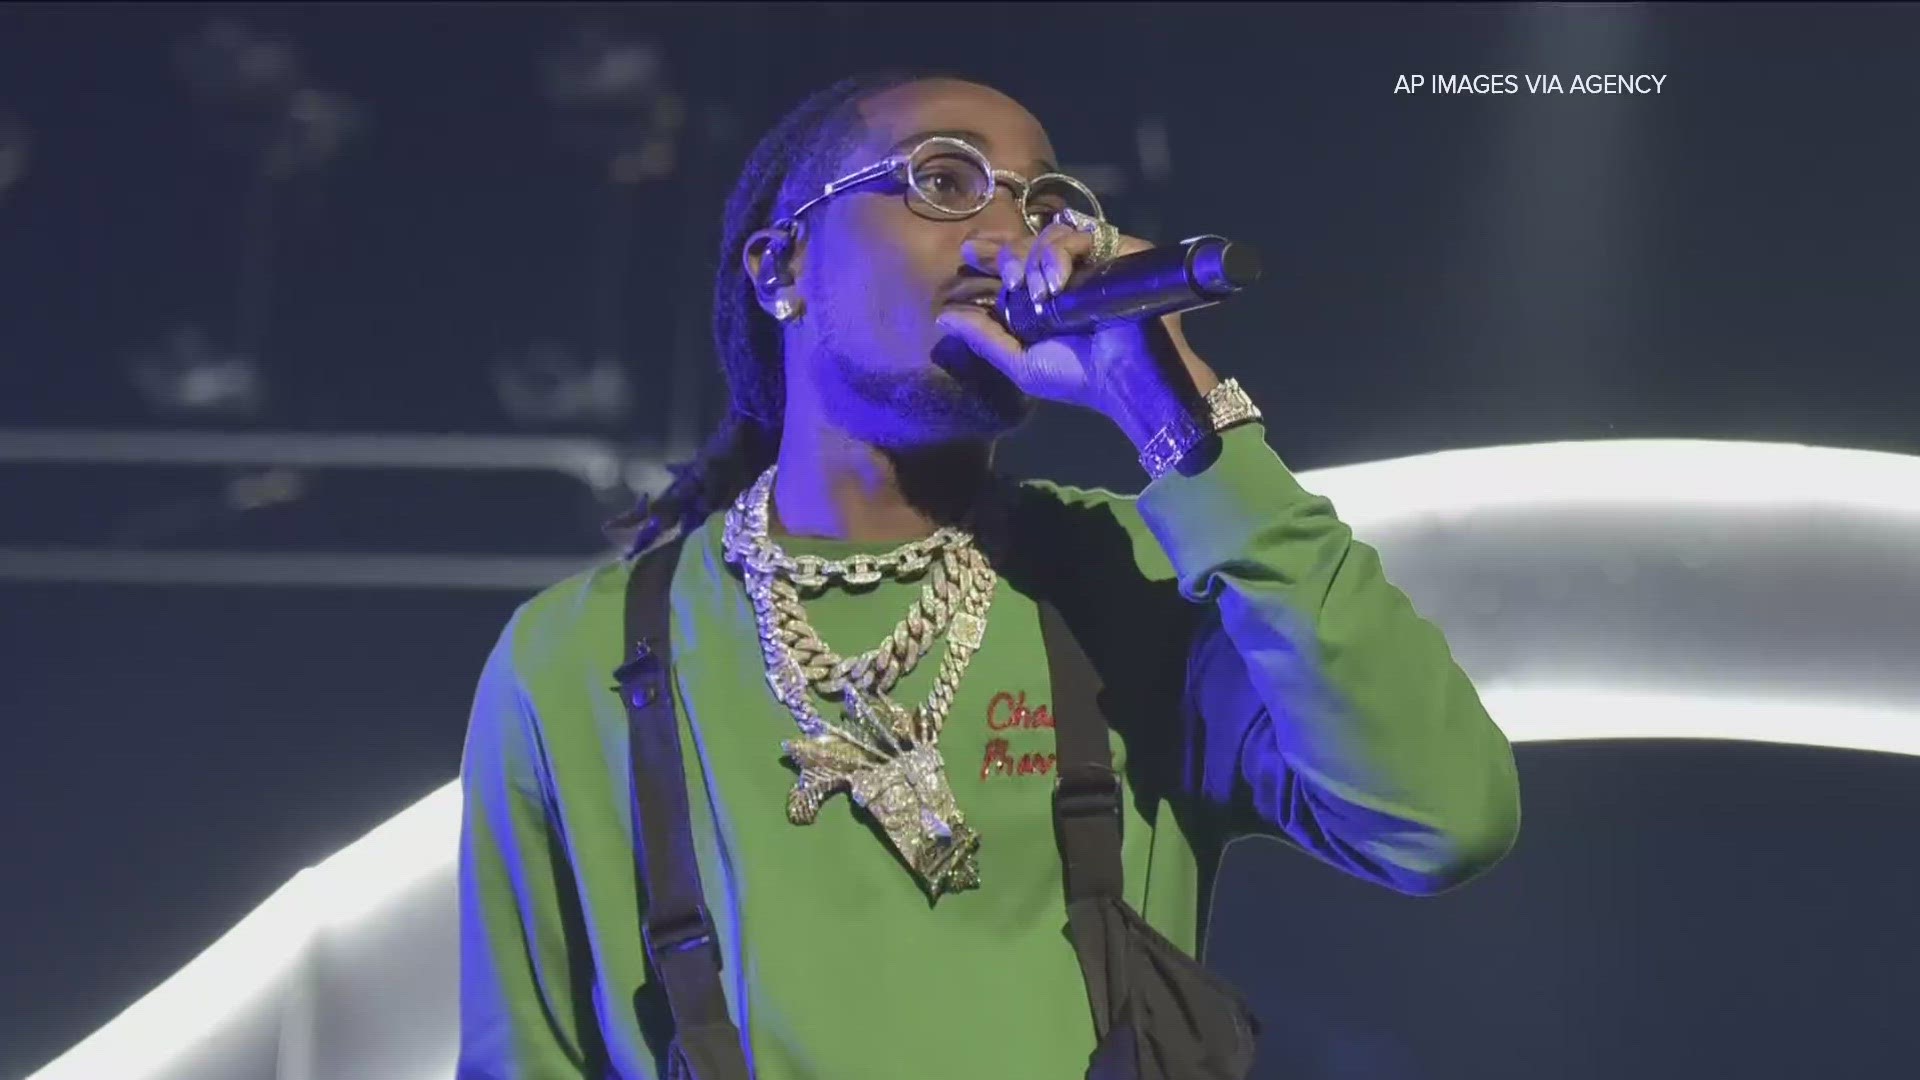 What the major Rocket Power rapper is considering was left a mystery, but who knows? Bulldogs could soon see Quavo passing the Hot Corner in Downtown Athens.